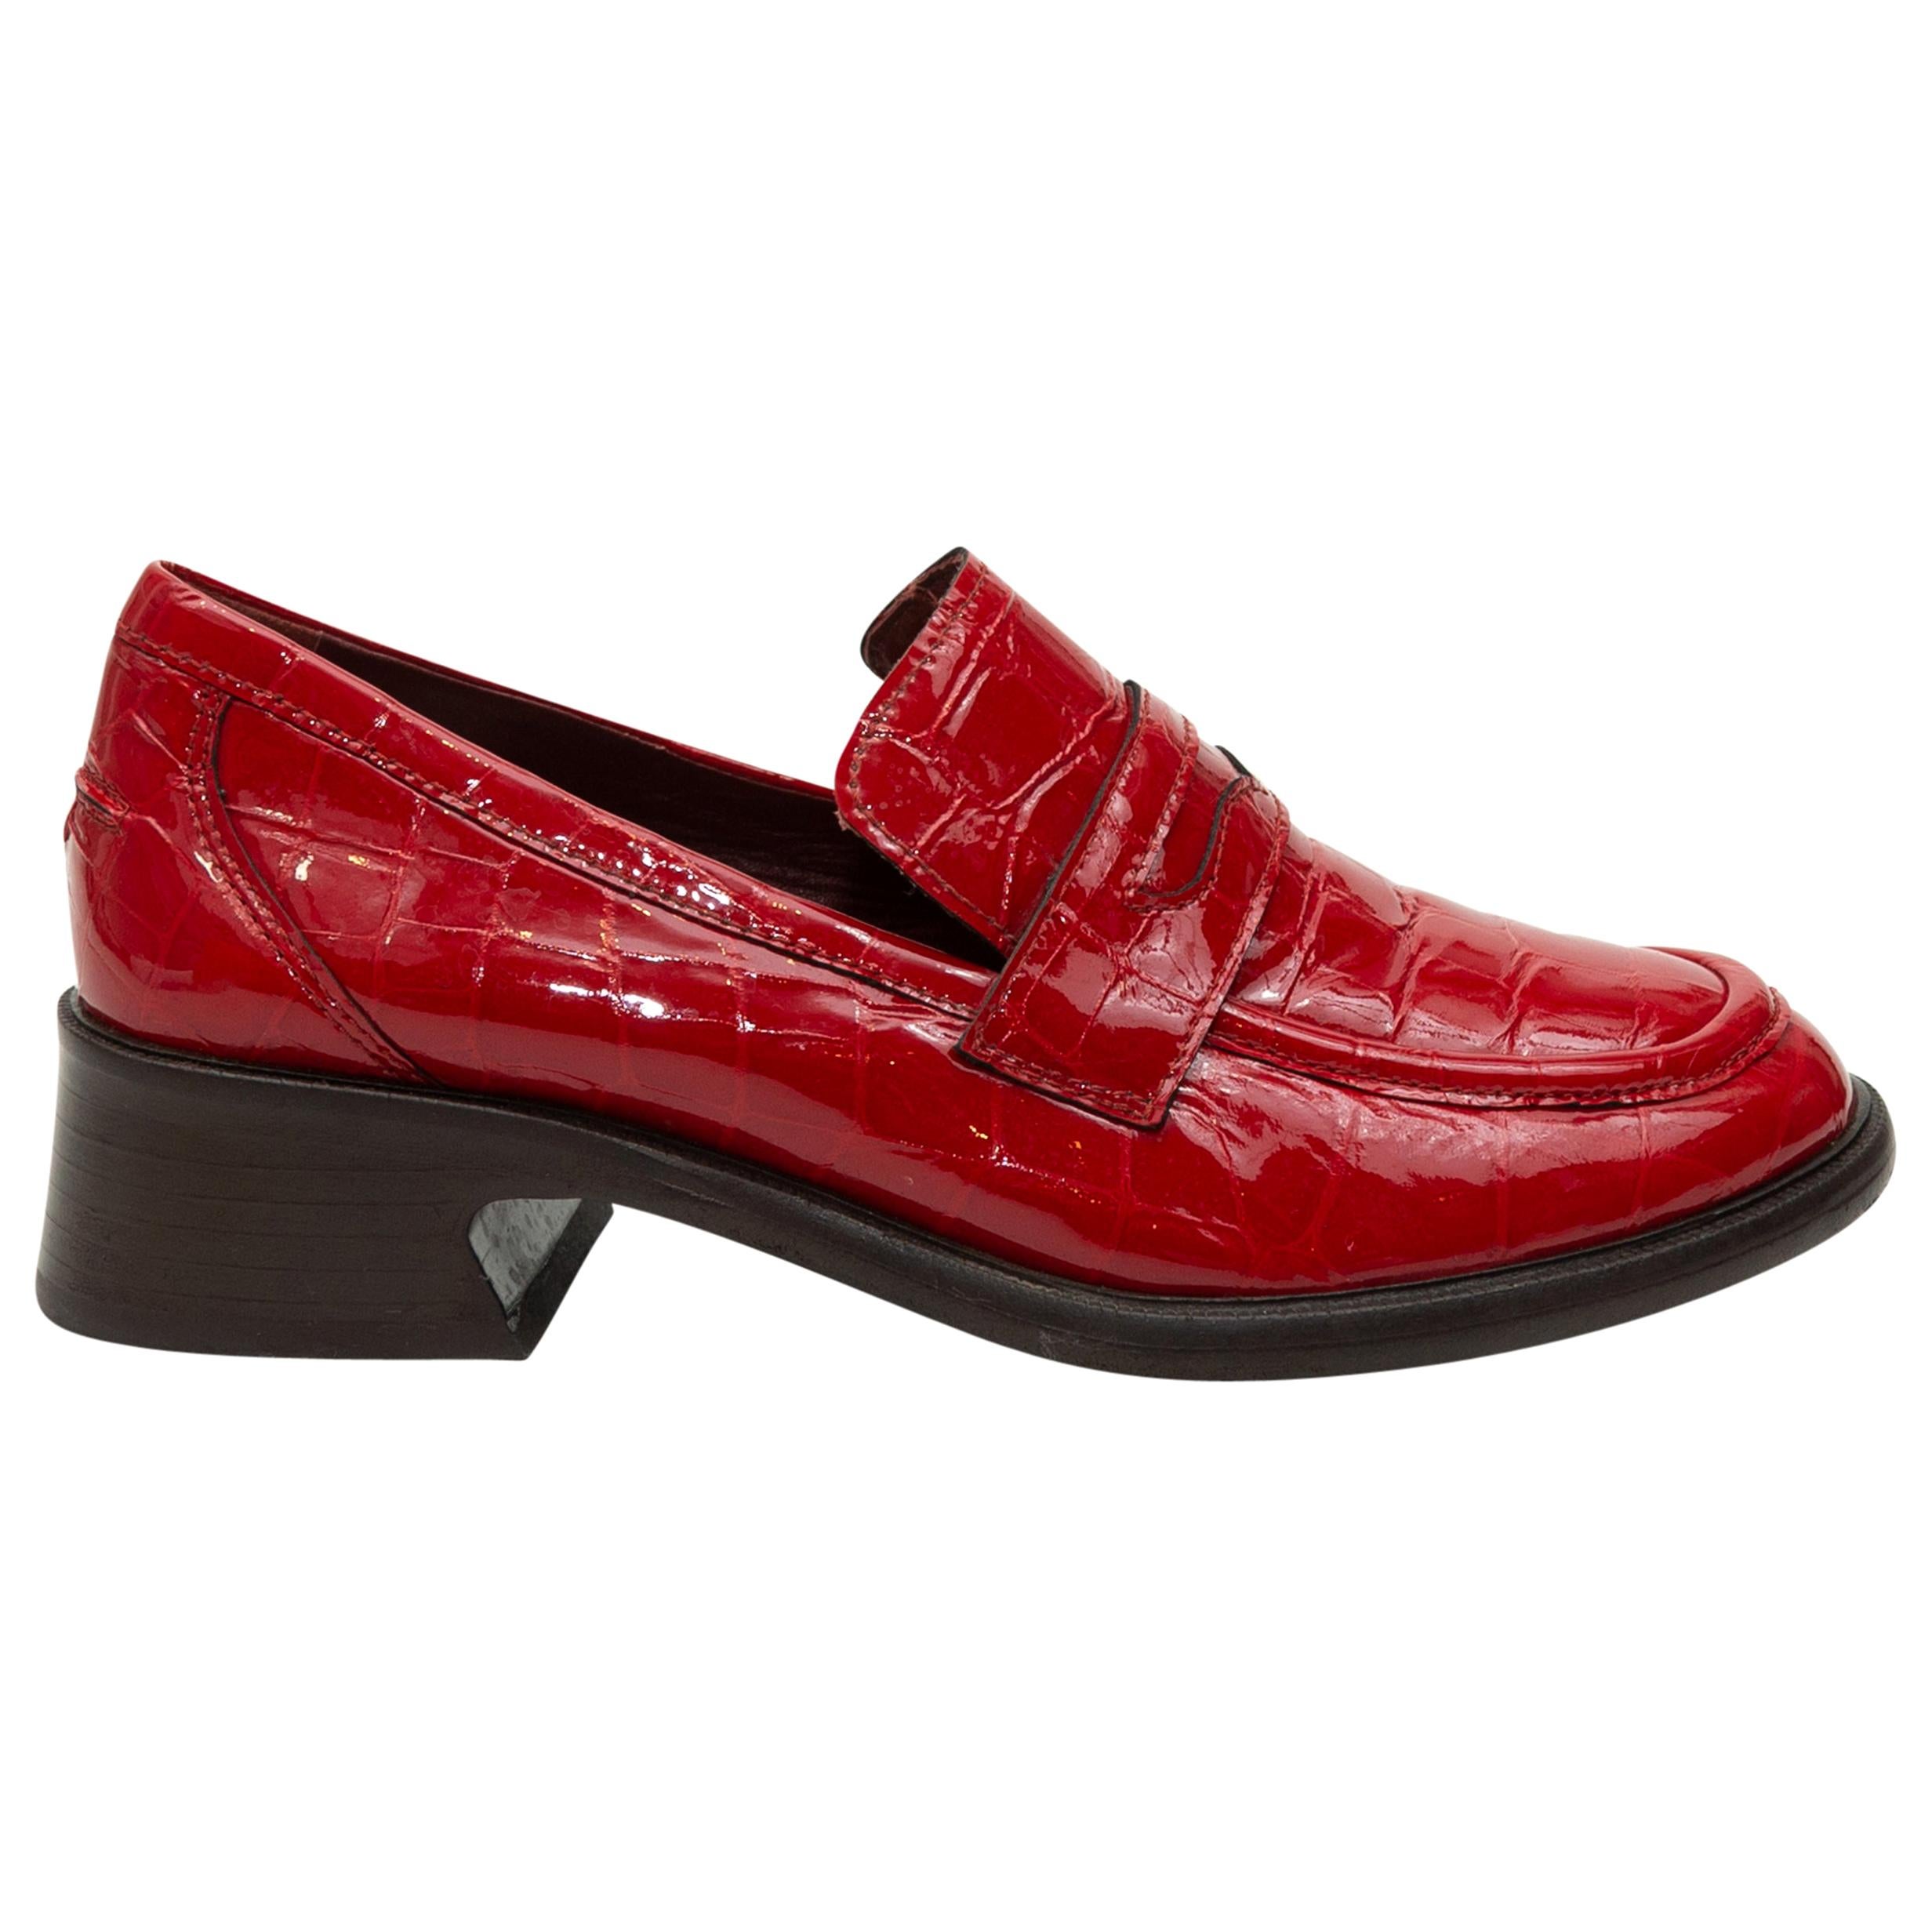 Sies Marjan Red Patent Leather Heeled Loafers